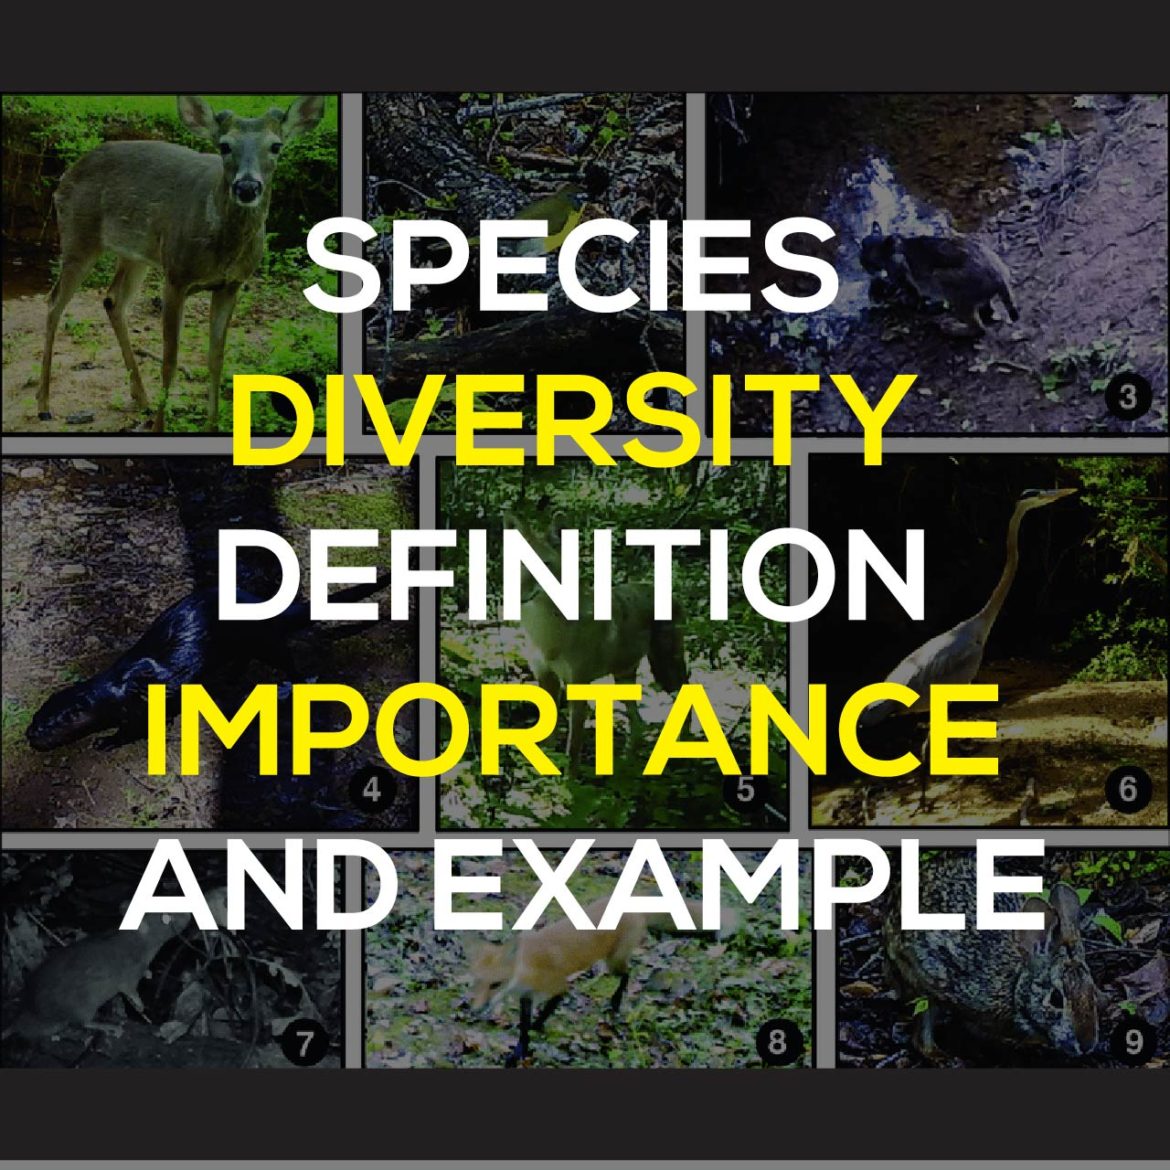 research questions on species diversity